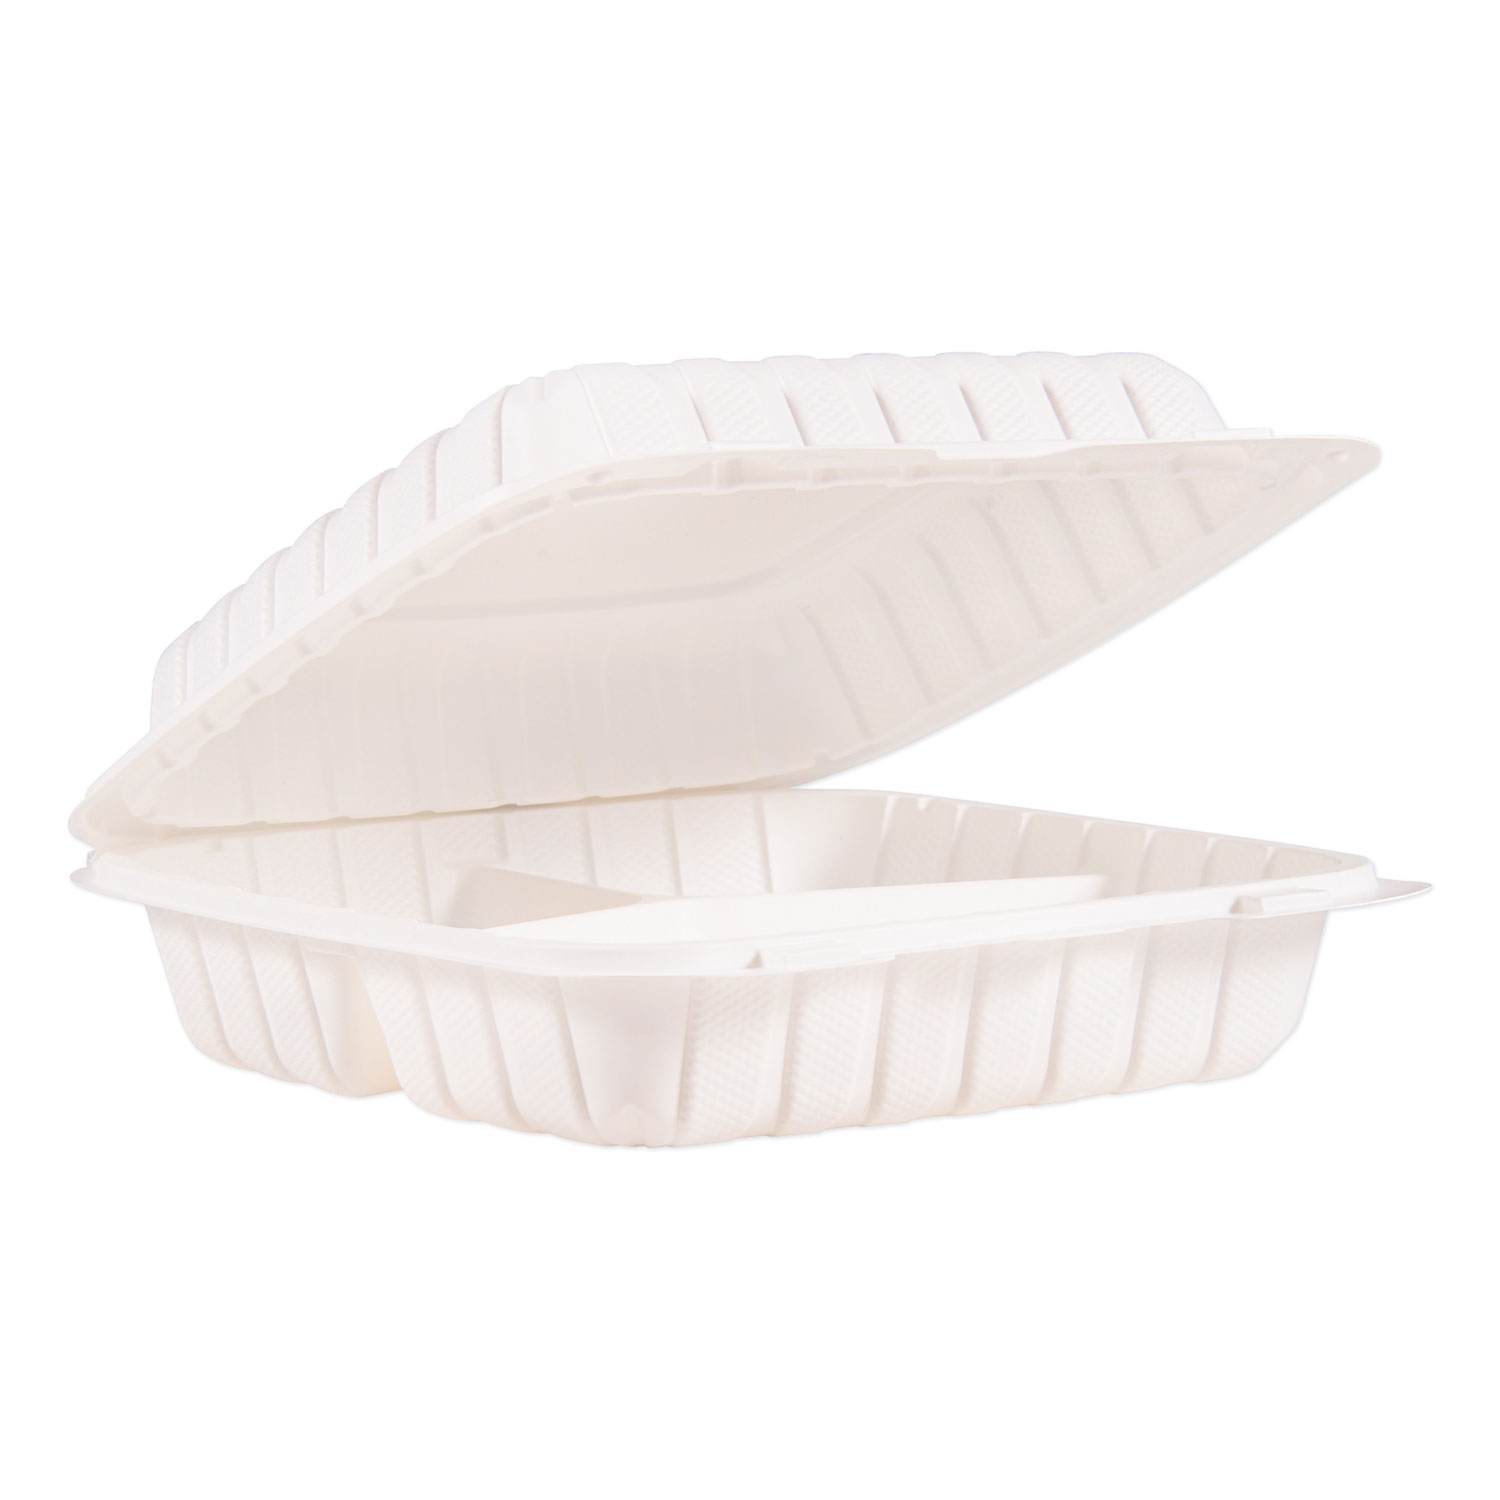 ProPlanet™ by Dart® Hinged Lid Three Compartment Containers, 9 x 8.8 x 3, White, 150/Carton